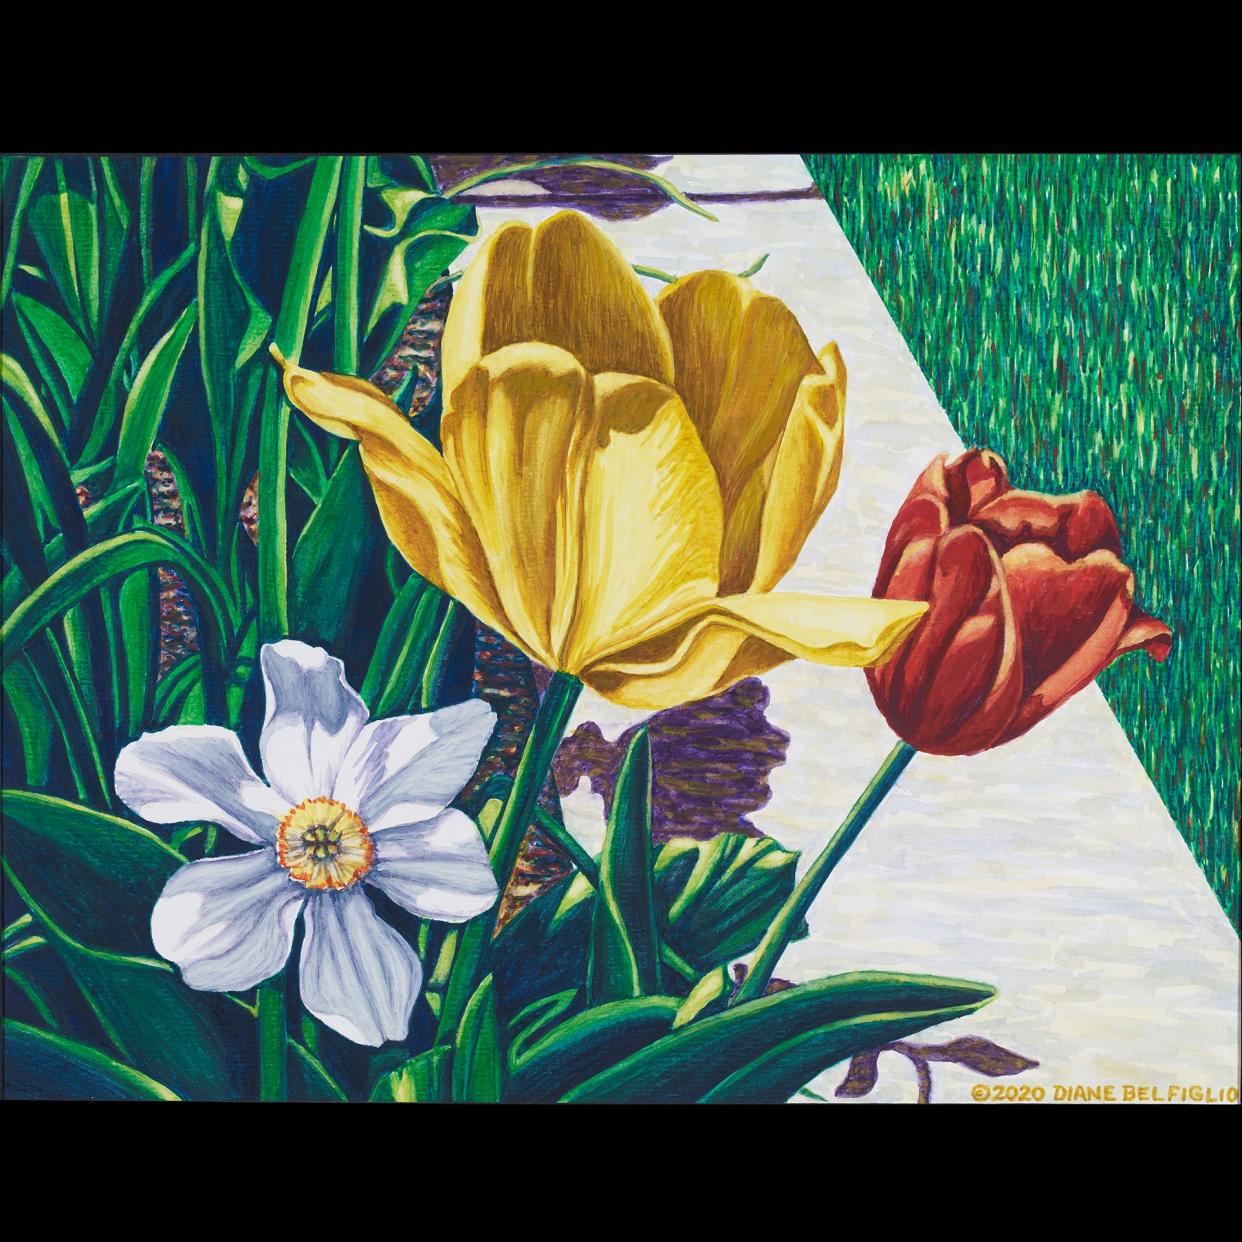 An exhibition will honor the artwork of the late Diane Belfiglio at Strauss Studios in downtown Canton. "The Artist's Legacy" opens Feb. 29 and will be on exhibit through April 19. Belfiglio was an award-winning painter and art professor at Walsh University.